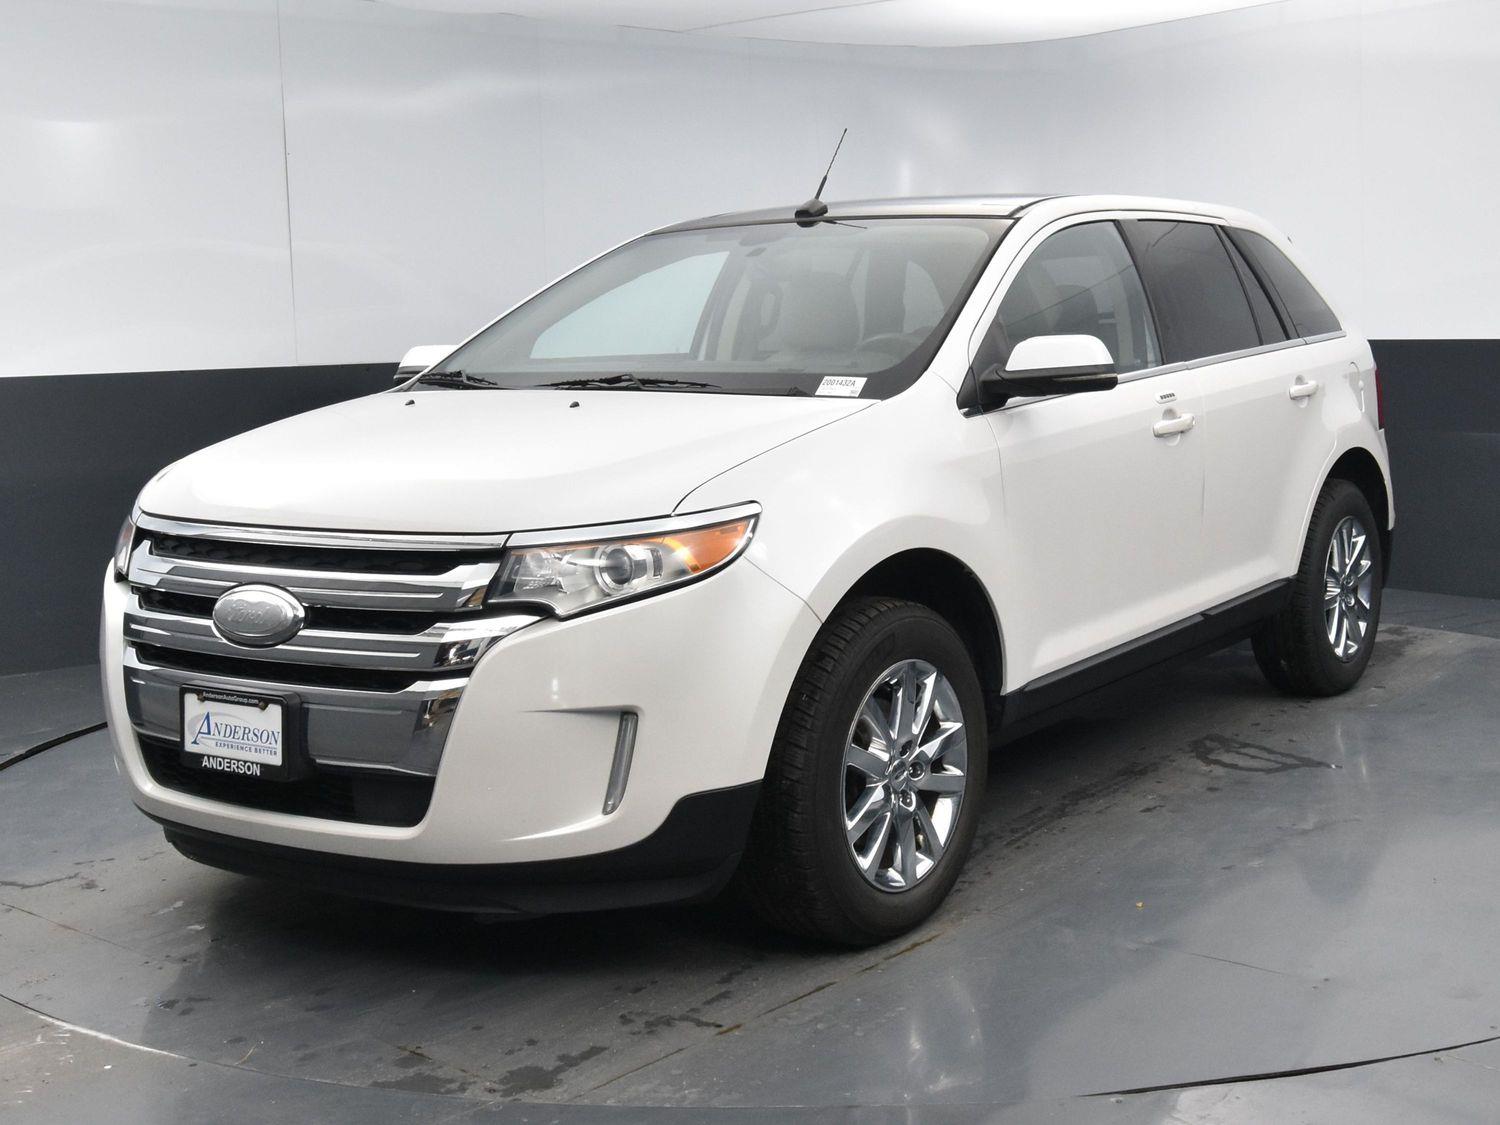 Used 2013 Ford Edge Limited SUV for sale in Grand Island NE